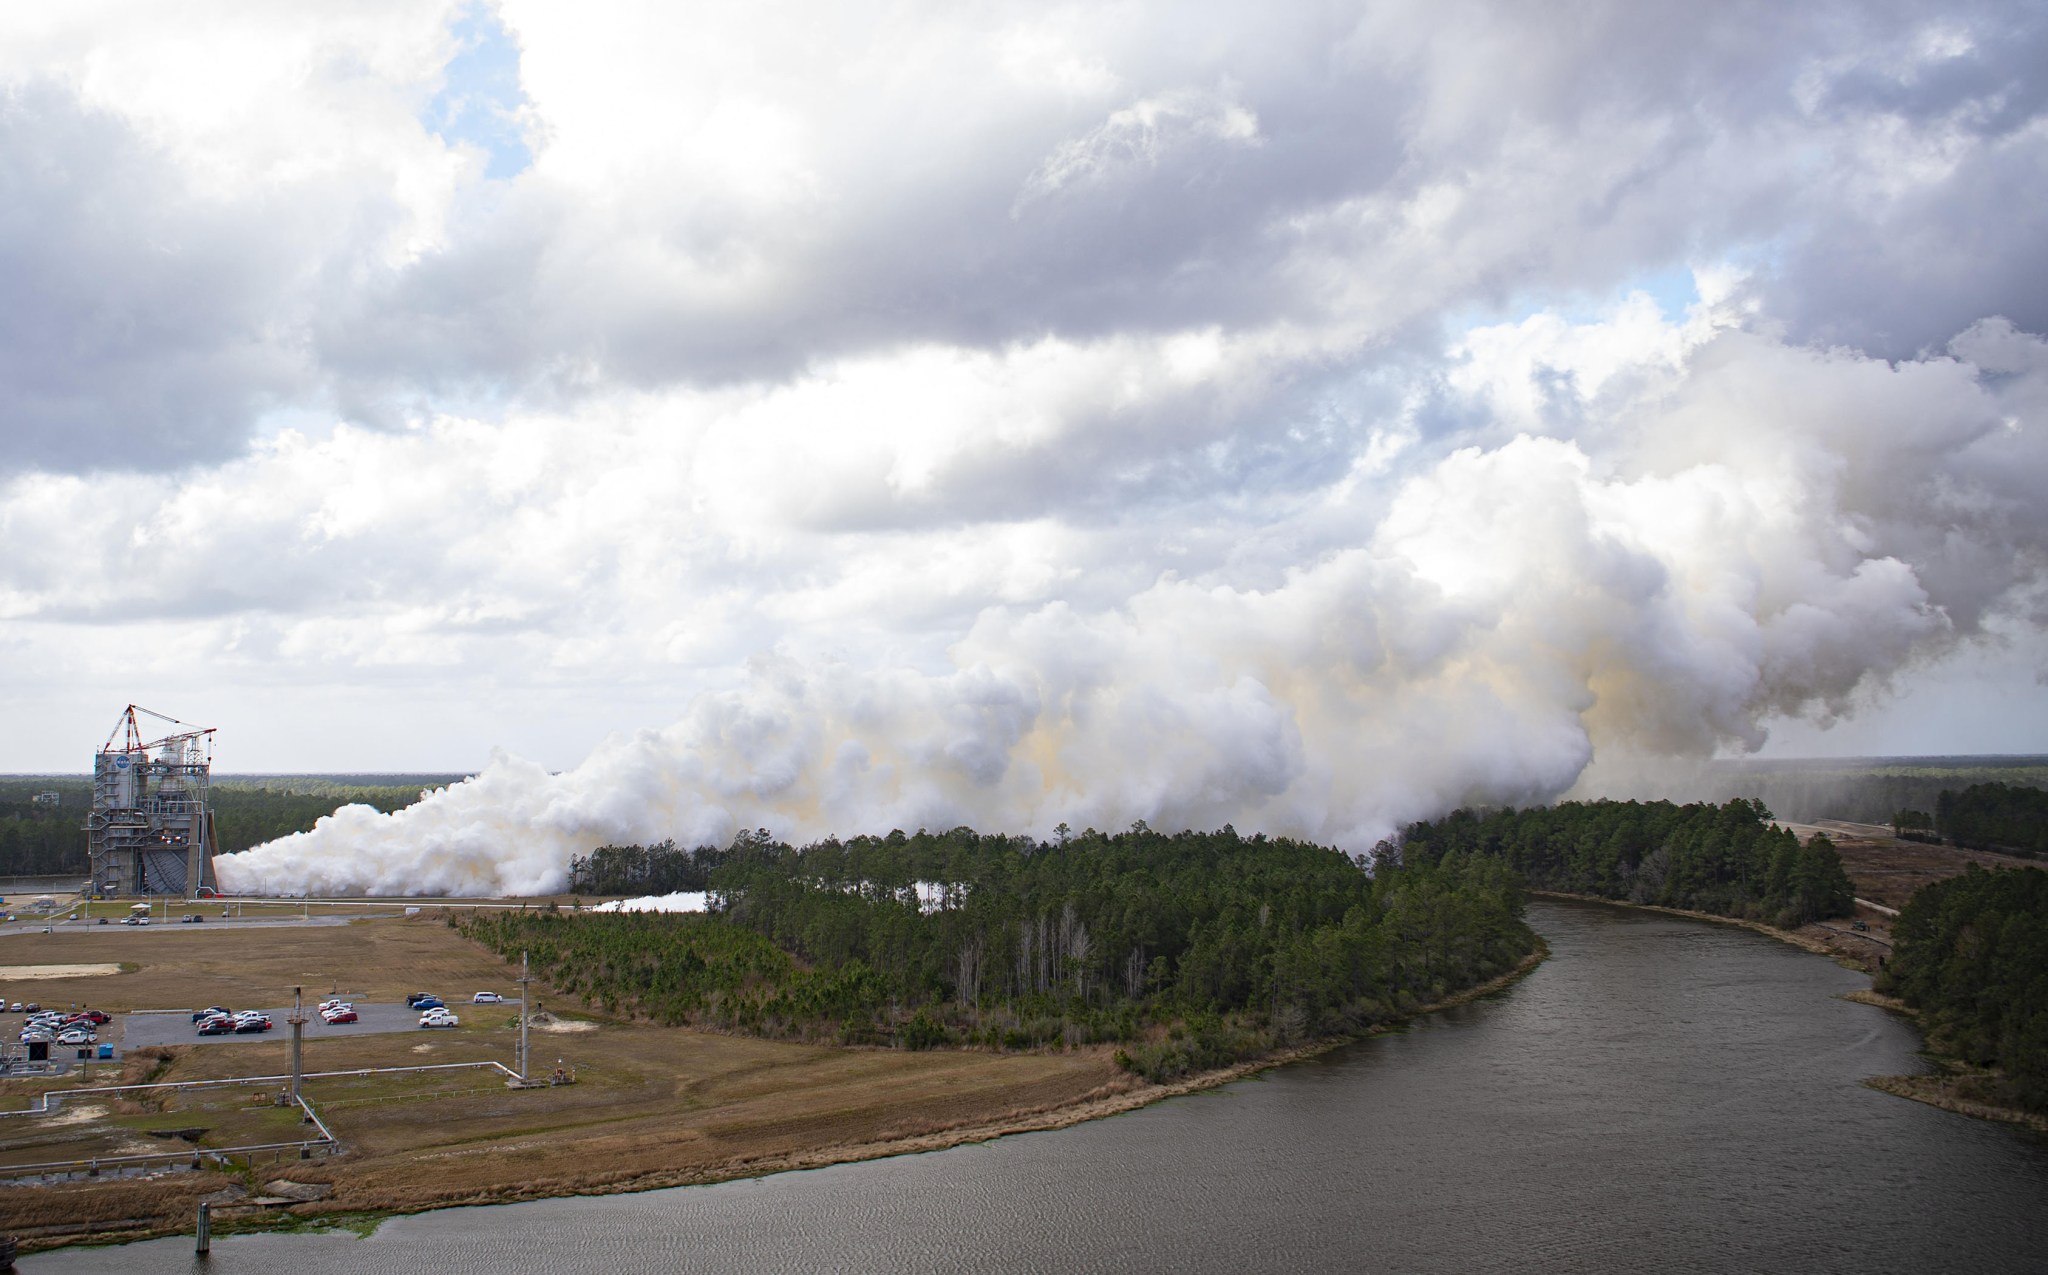 NASA conducts an RS-25 hot fire test on the Fred Haise Test Stand at NASA’s Stennis Space Center in south Mississippi on Feb. 22, 2023.